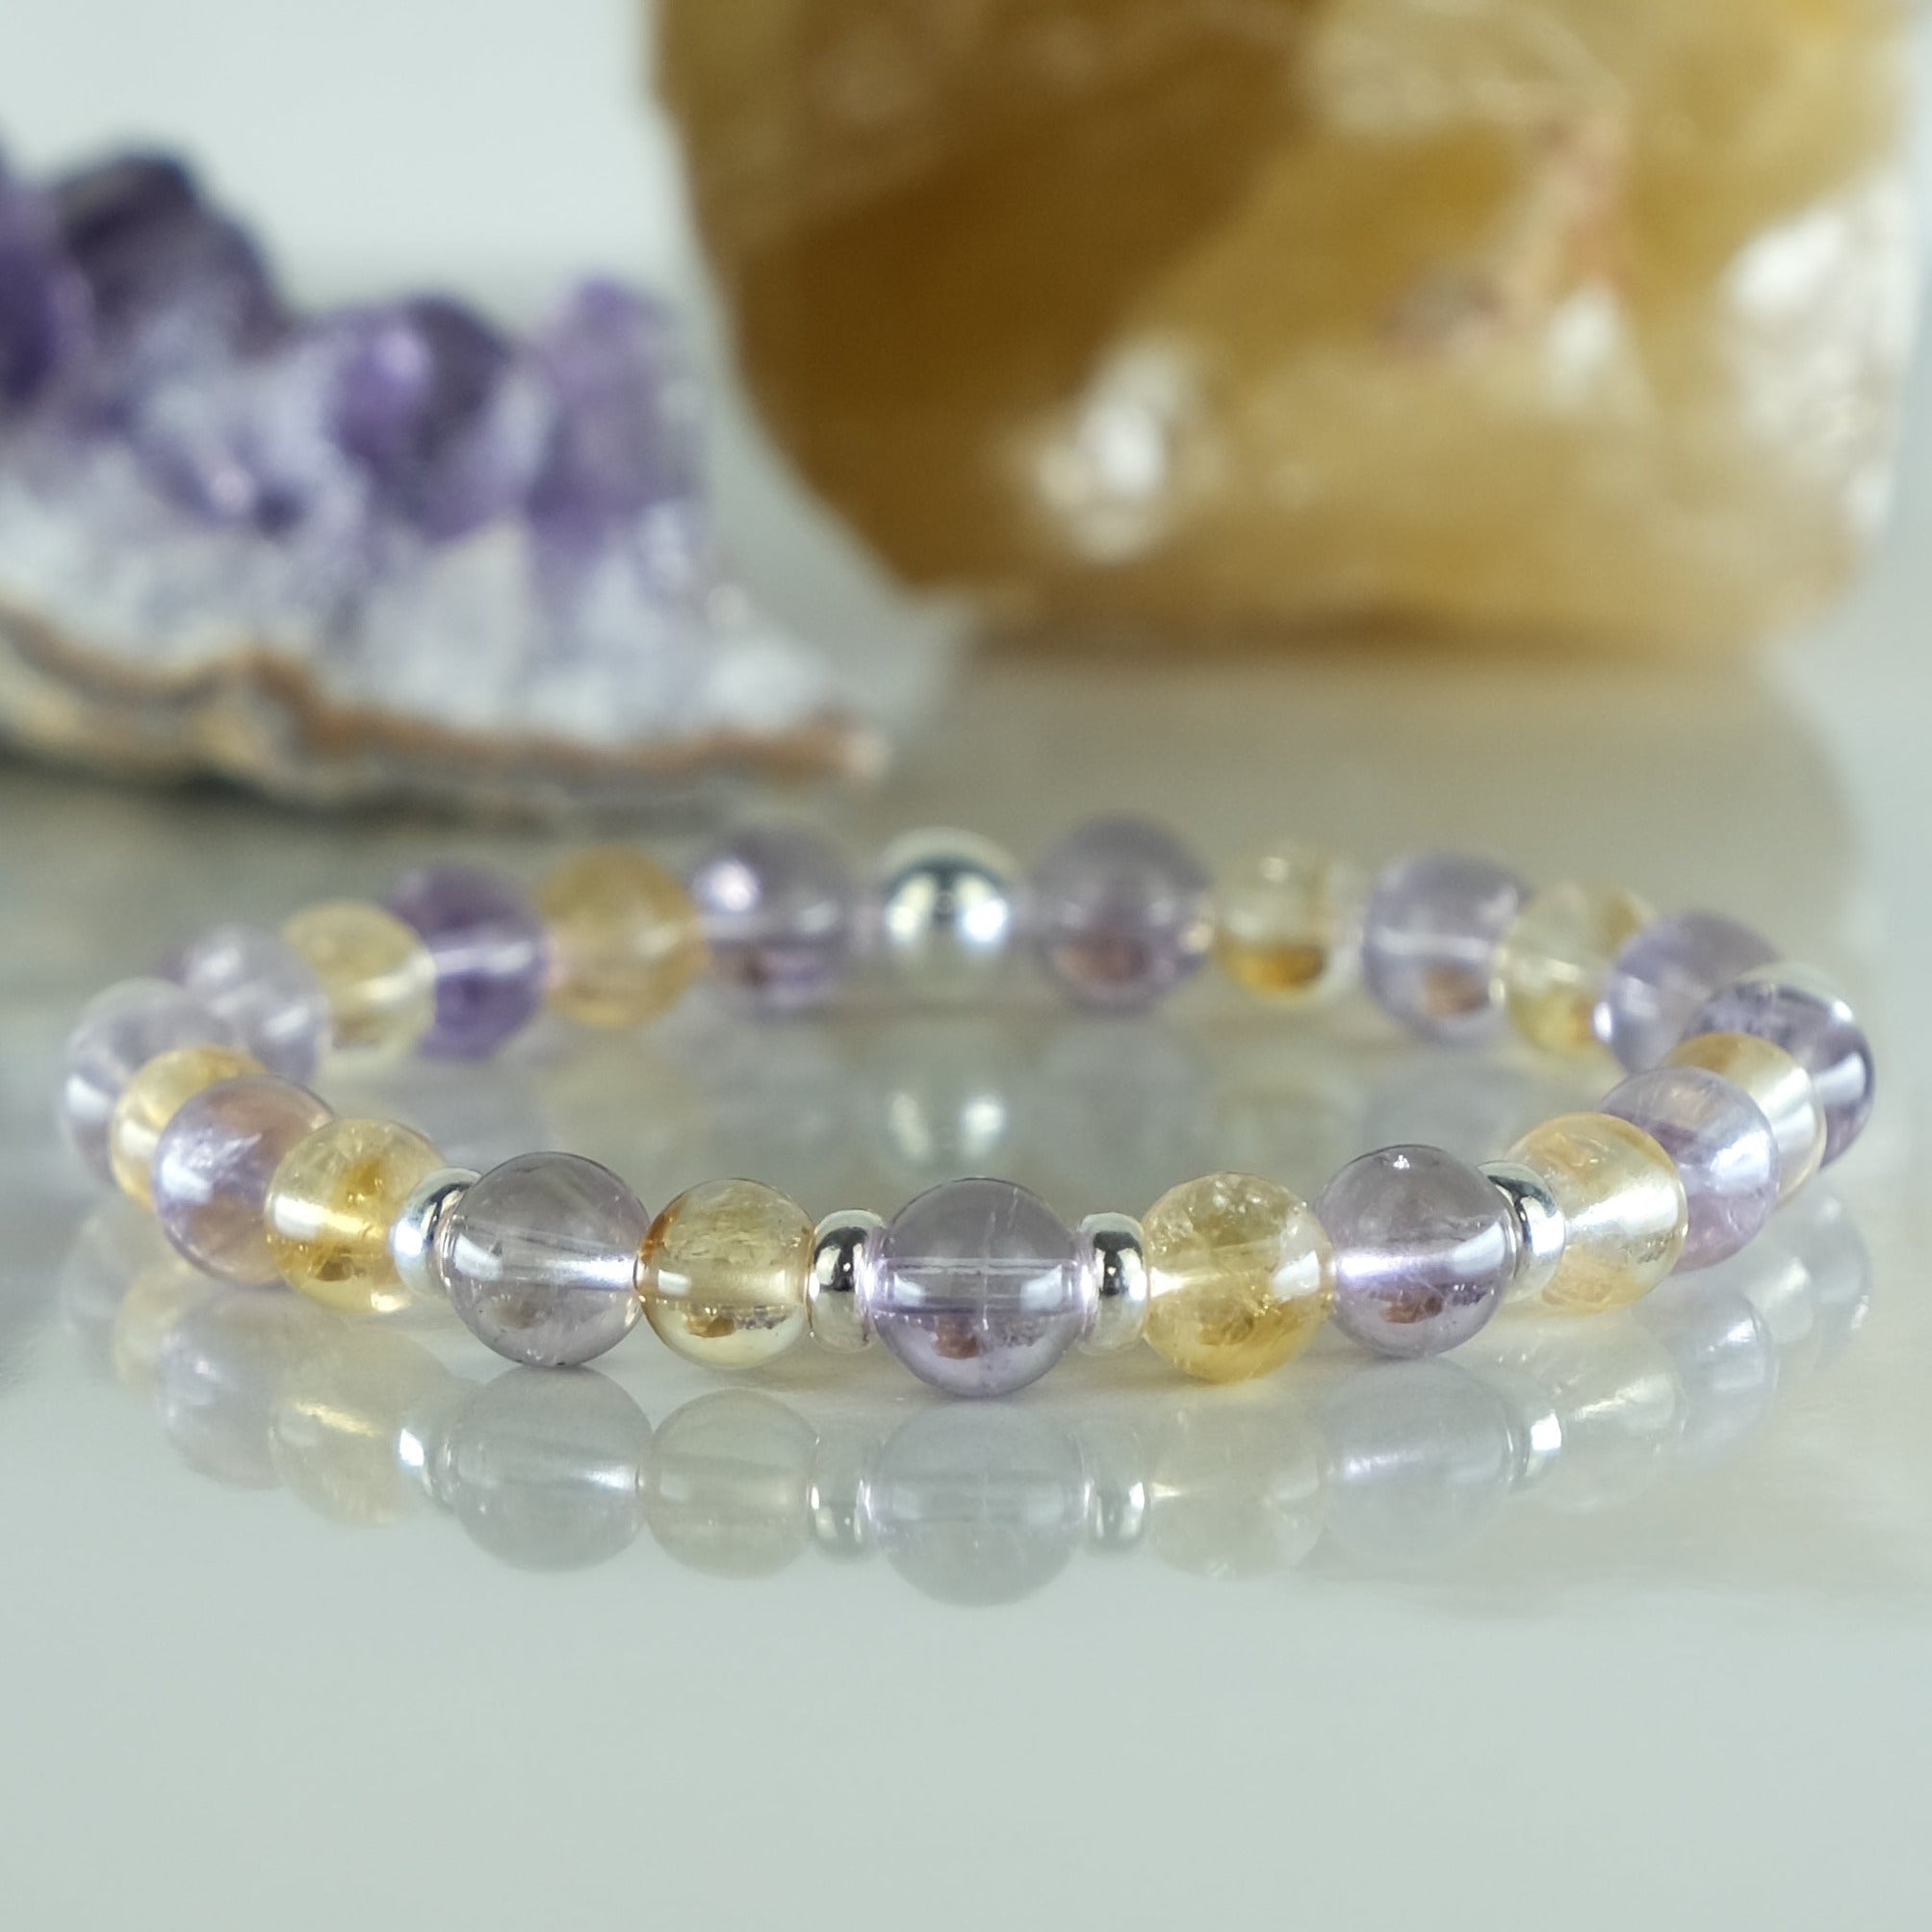 6mm amethyst and citrine gemstone bracelet with 925 silver accents